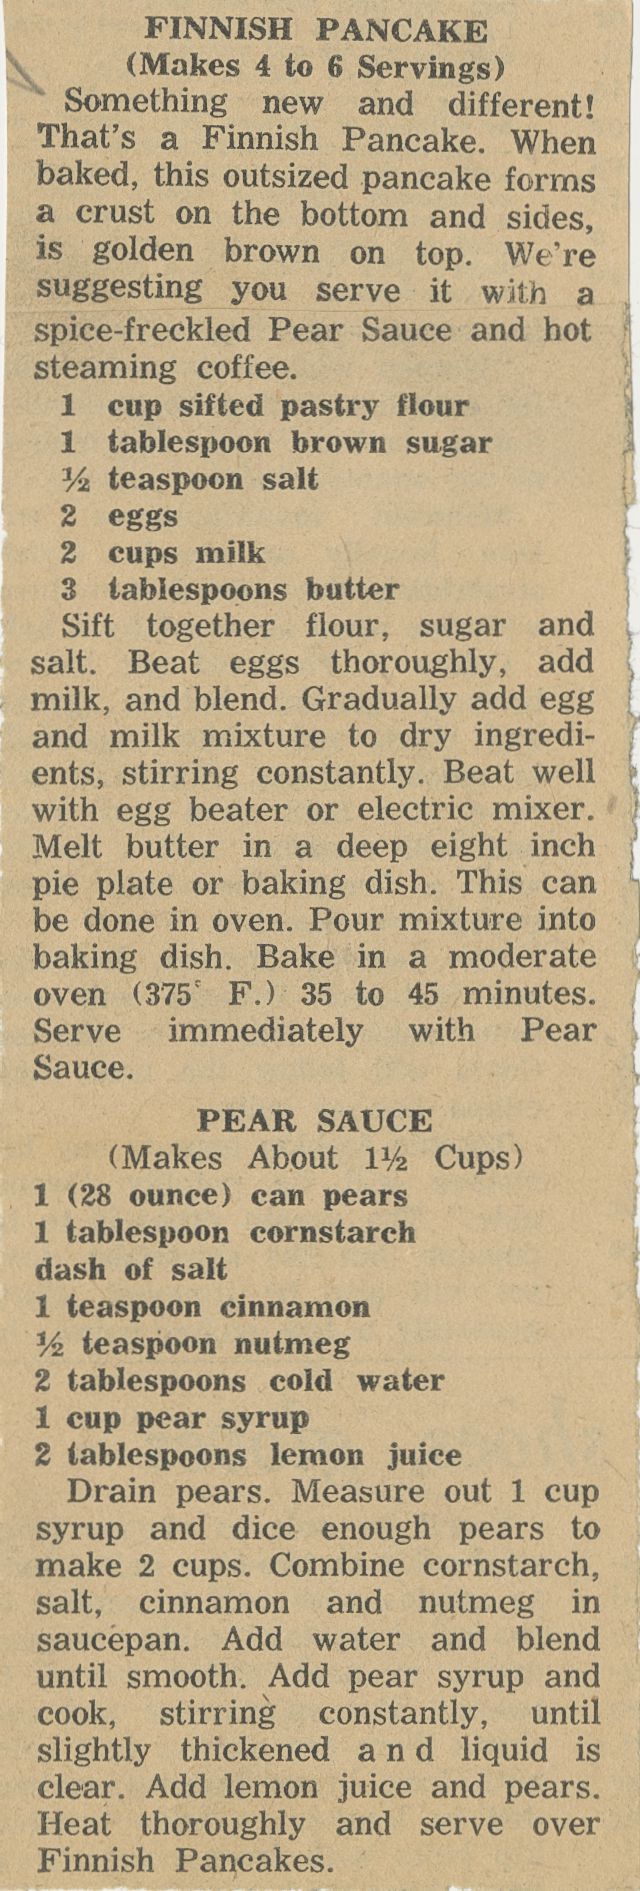 Digitized newspaper clipping with recipe for Finnish Pancake and Pear Sauce.